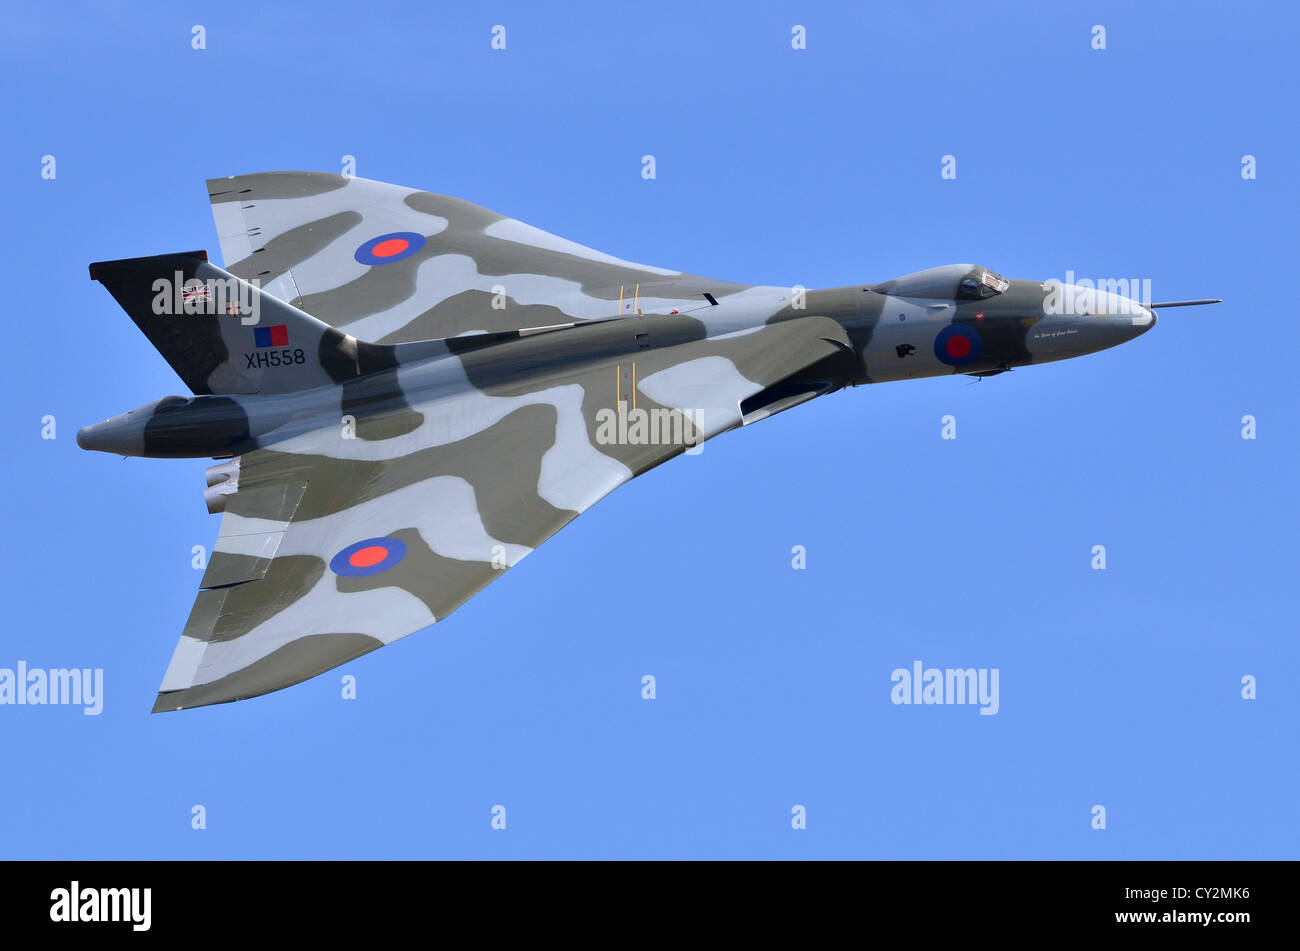 Avro Vulcan bomber aircraft in RAF camouflage displaying at Duxford Airshow. Vulcan B2 XH558 was the last flying V Bomber. Stock Photo